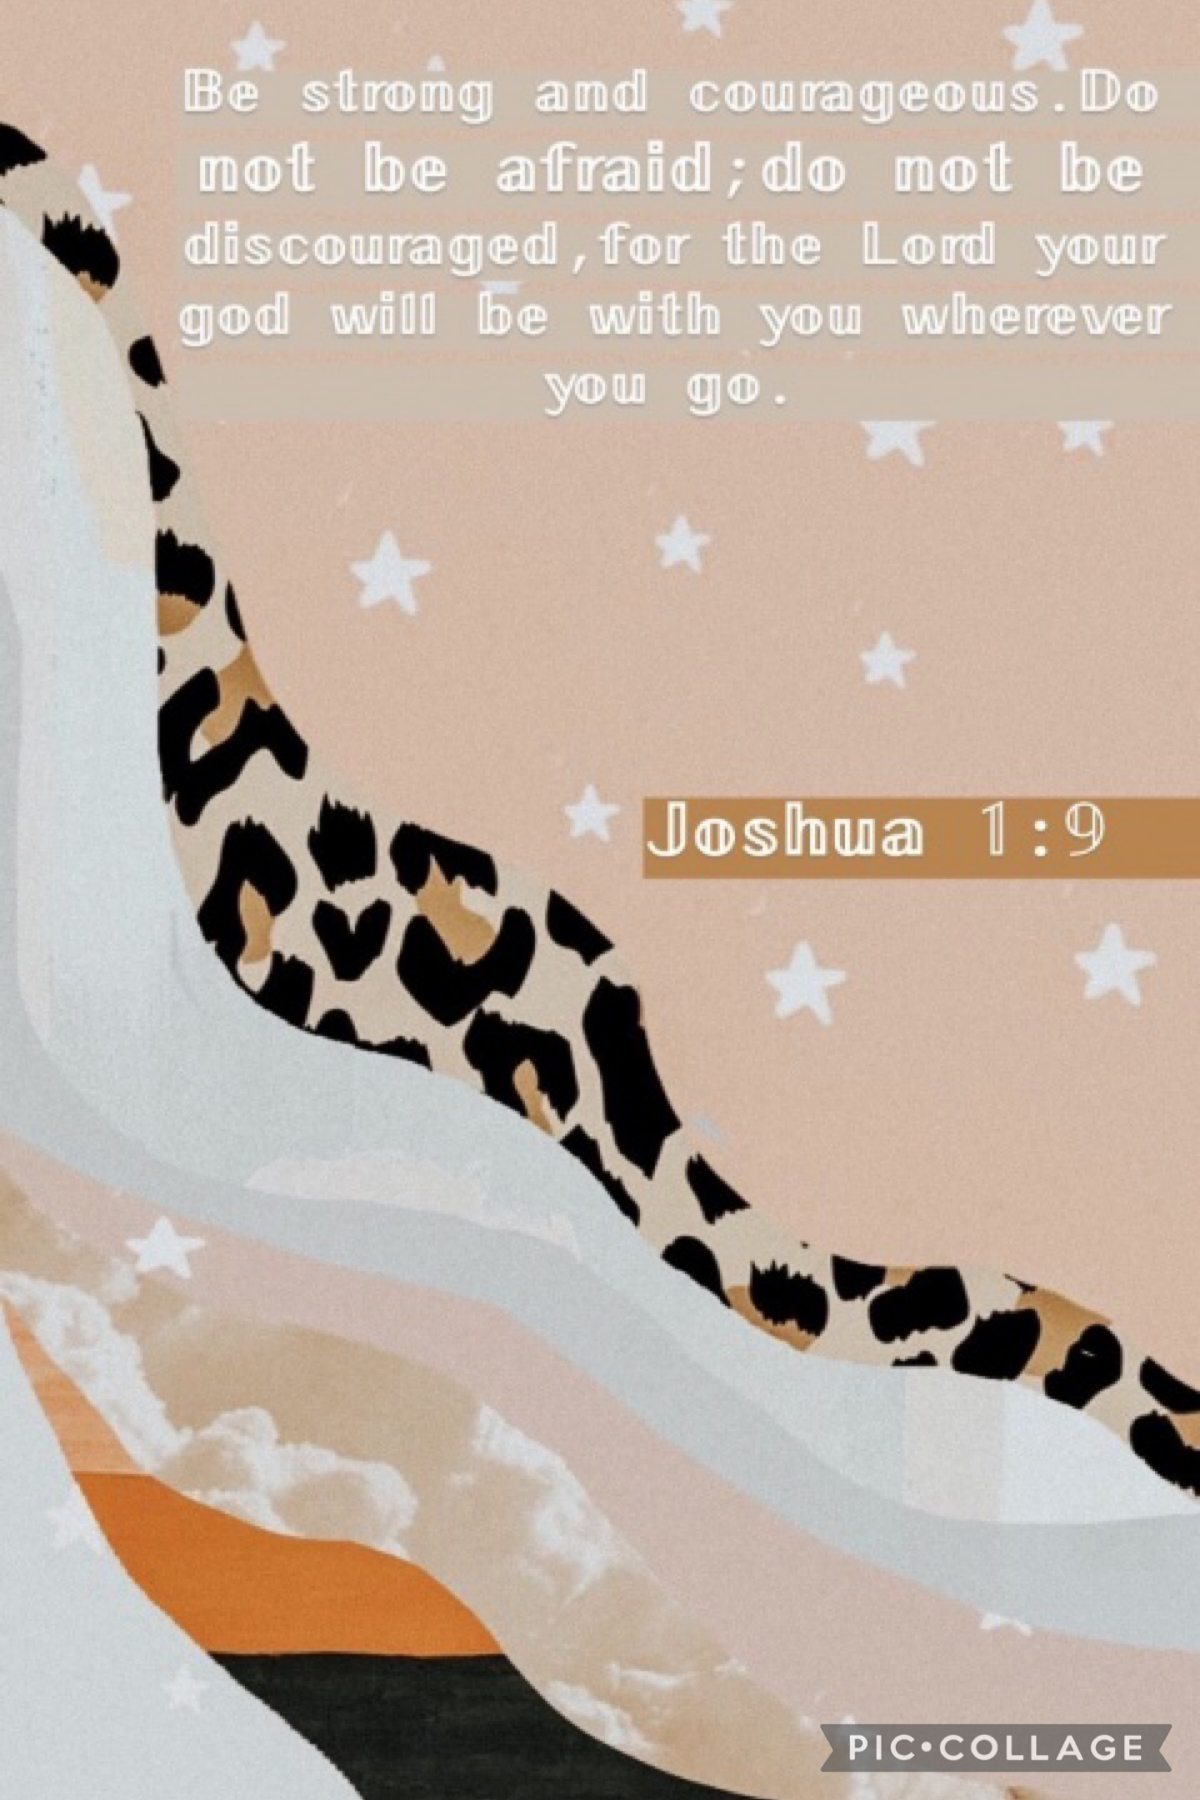 Hi everybody! Happy Tuesday May 17th🤍🧡✨
This verse was requested by _thebluestskies_ hope I spelled that right!
Have a blessed day!🌊 
